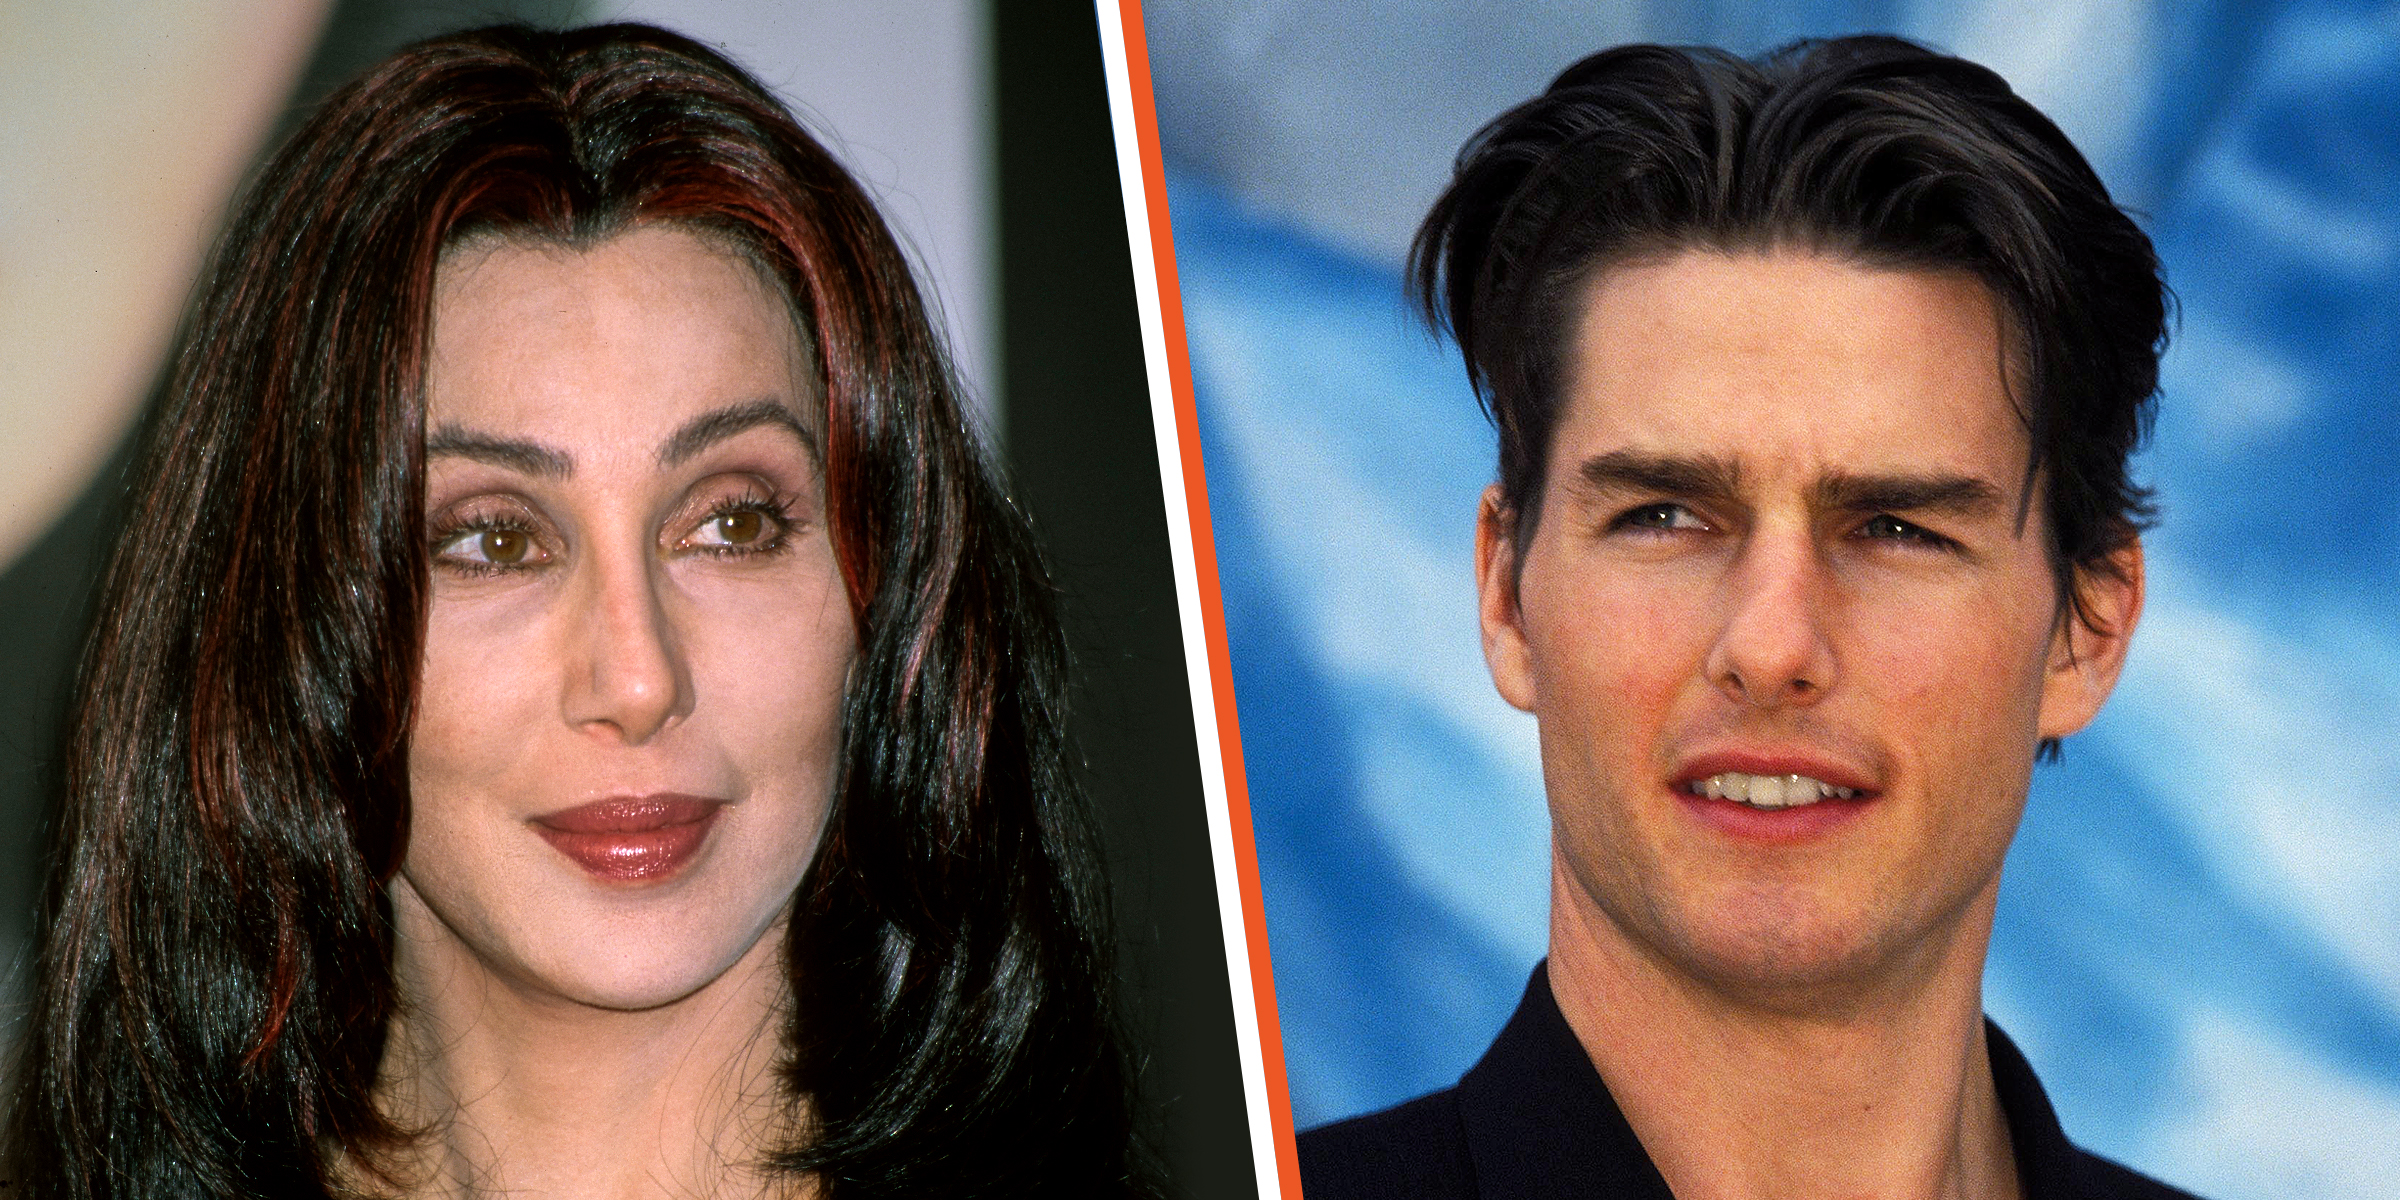 Cher and Tom Cruise | Source: Getty Images